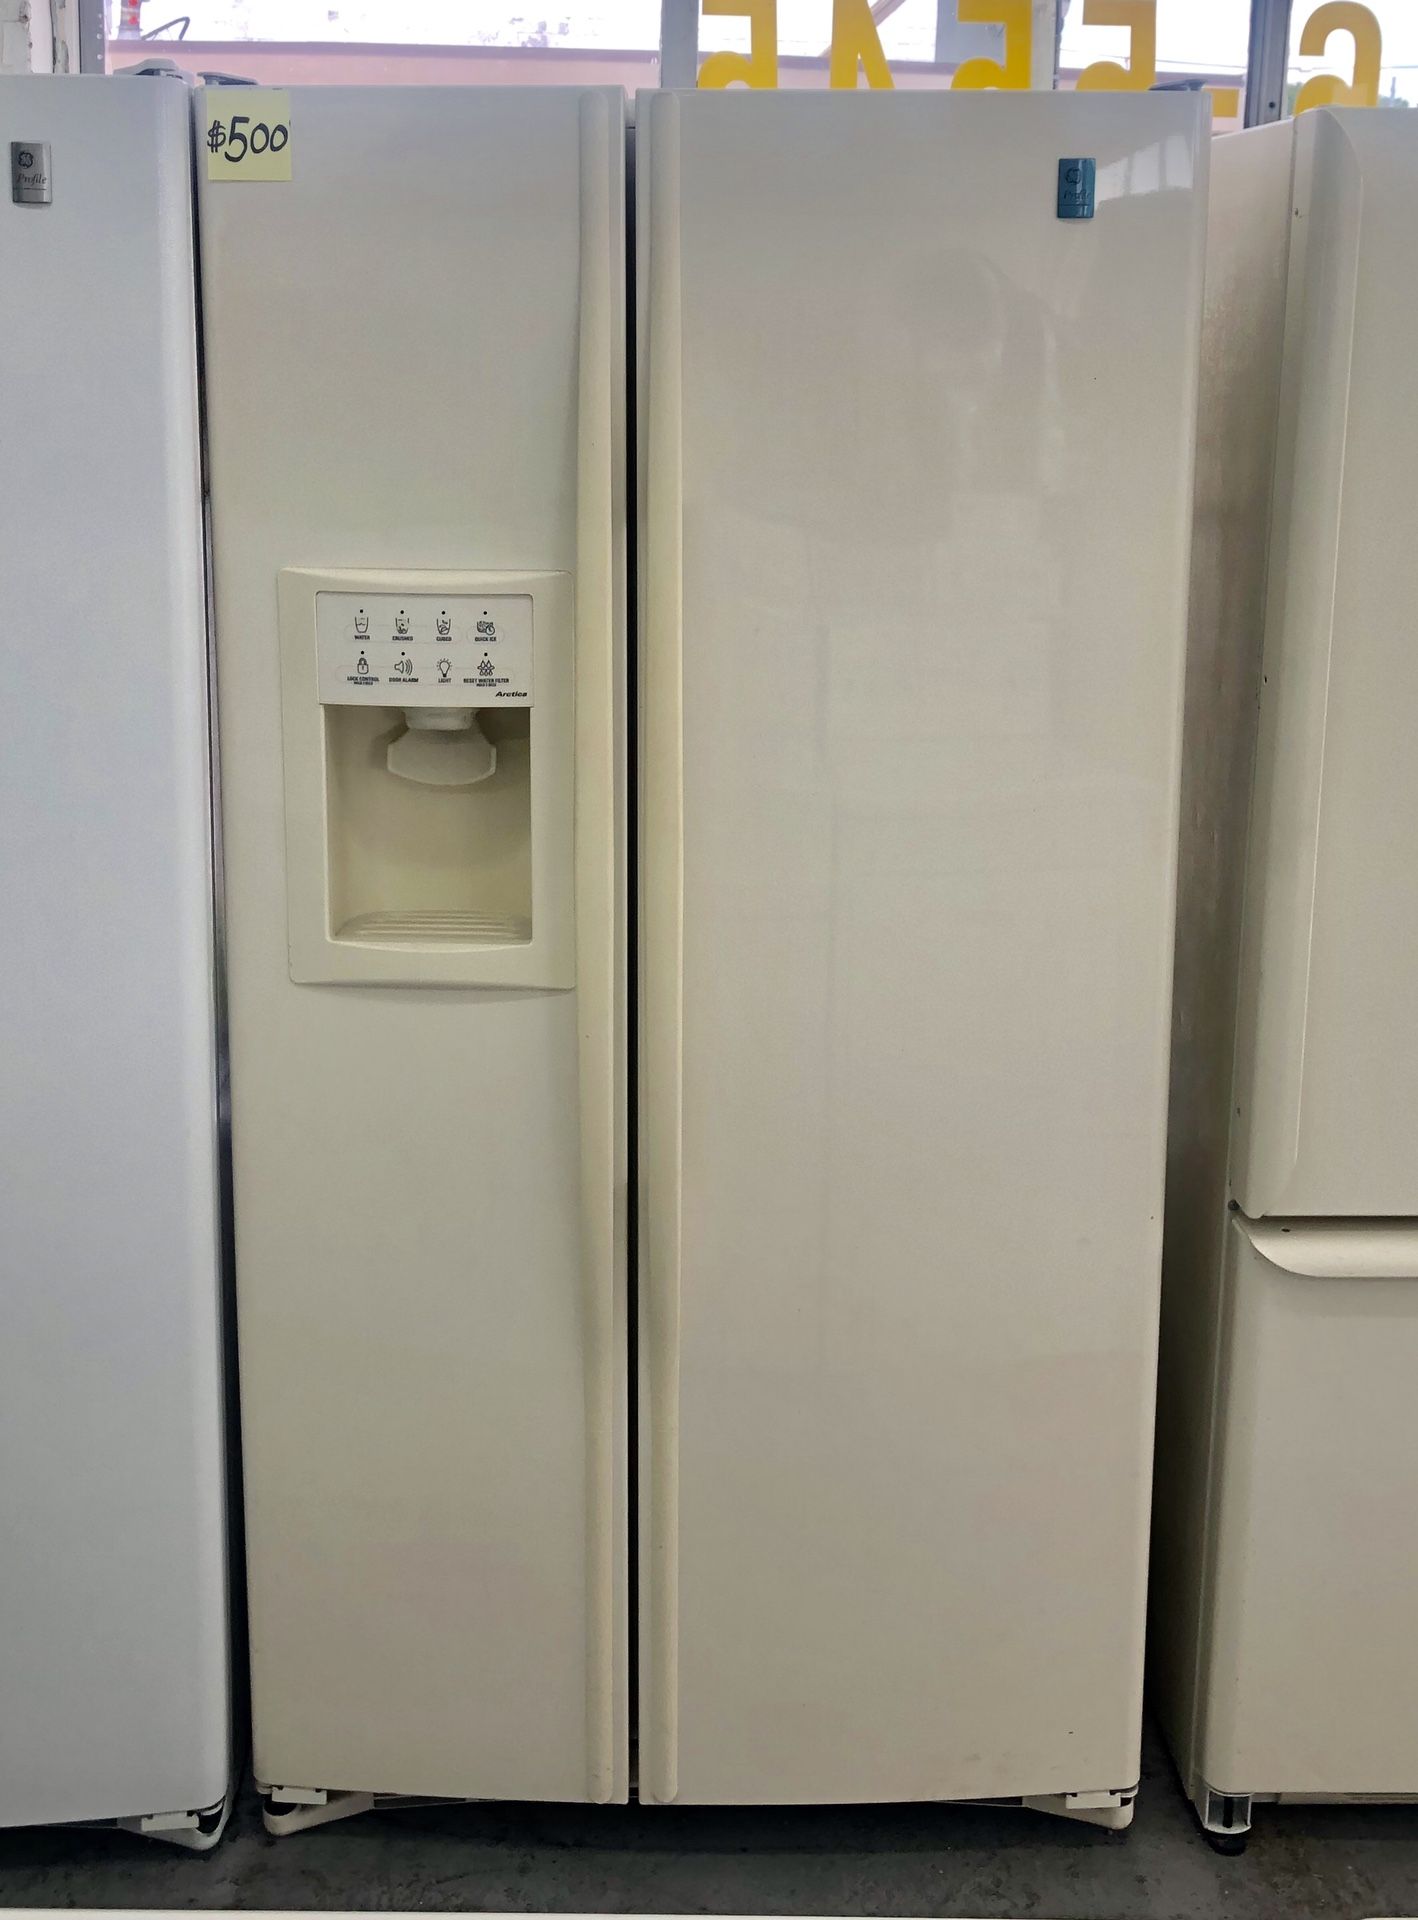 Comes with free 6 Months Warranty-like new biscuit color side by side refrigerator Ge profile